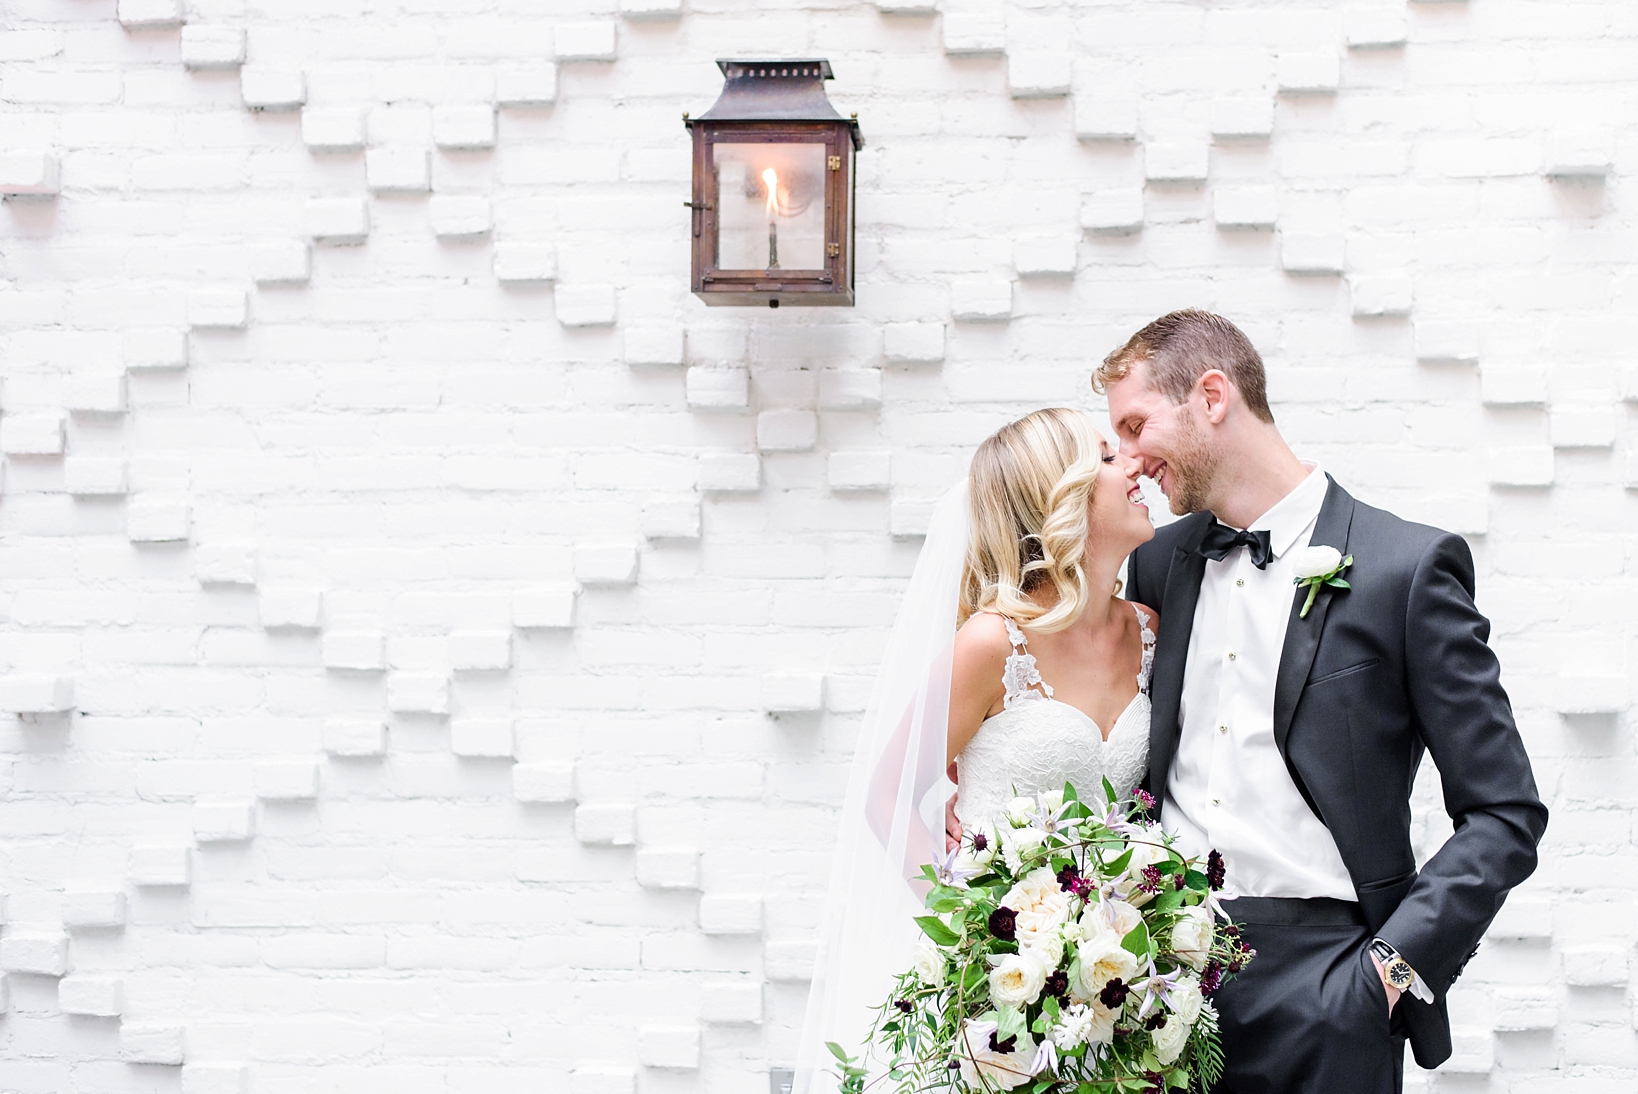 Bride and groom about to kiss in front of a patterned brick wall at the Oxford Exchange in Tampa, FL